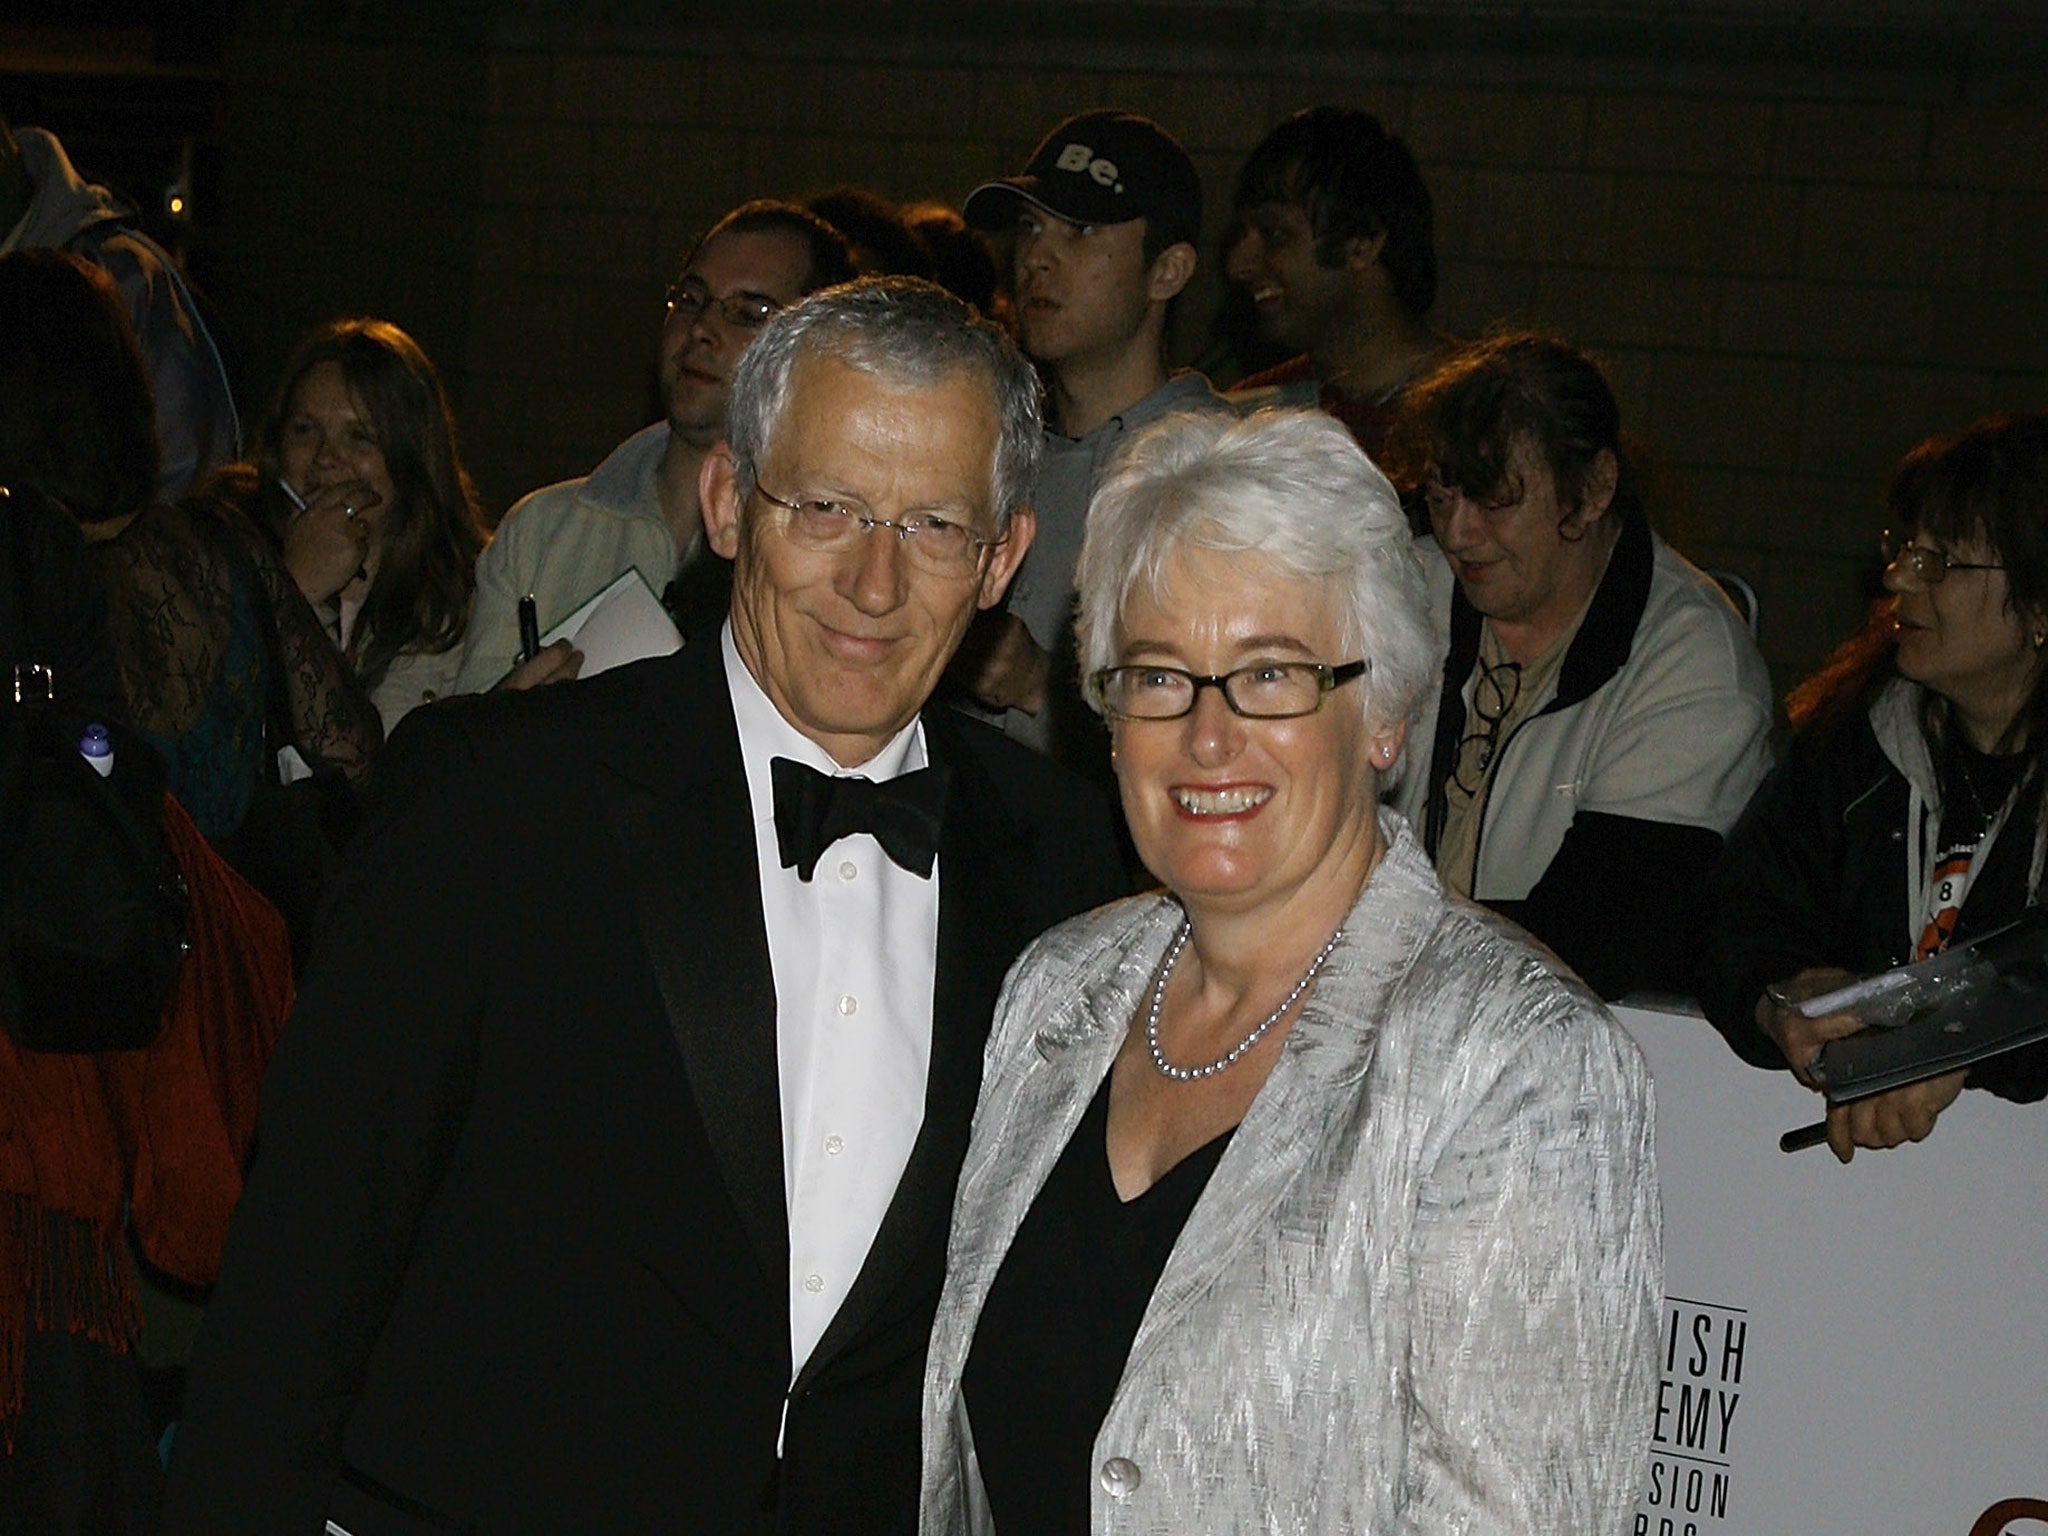 Nick Hewer and Margaret Mountford, co-presenters of BBC1’s Nick and Margaret: We Pay Your Benefits